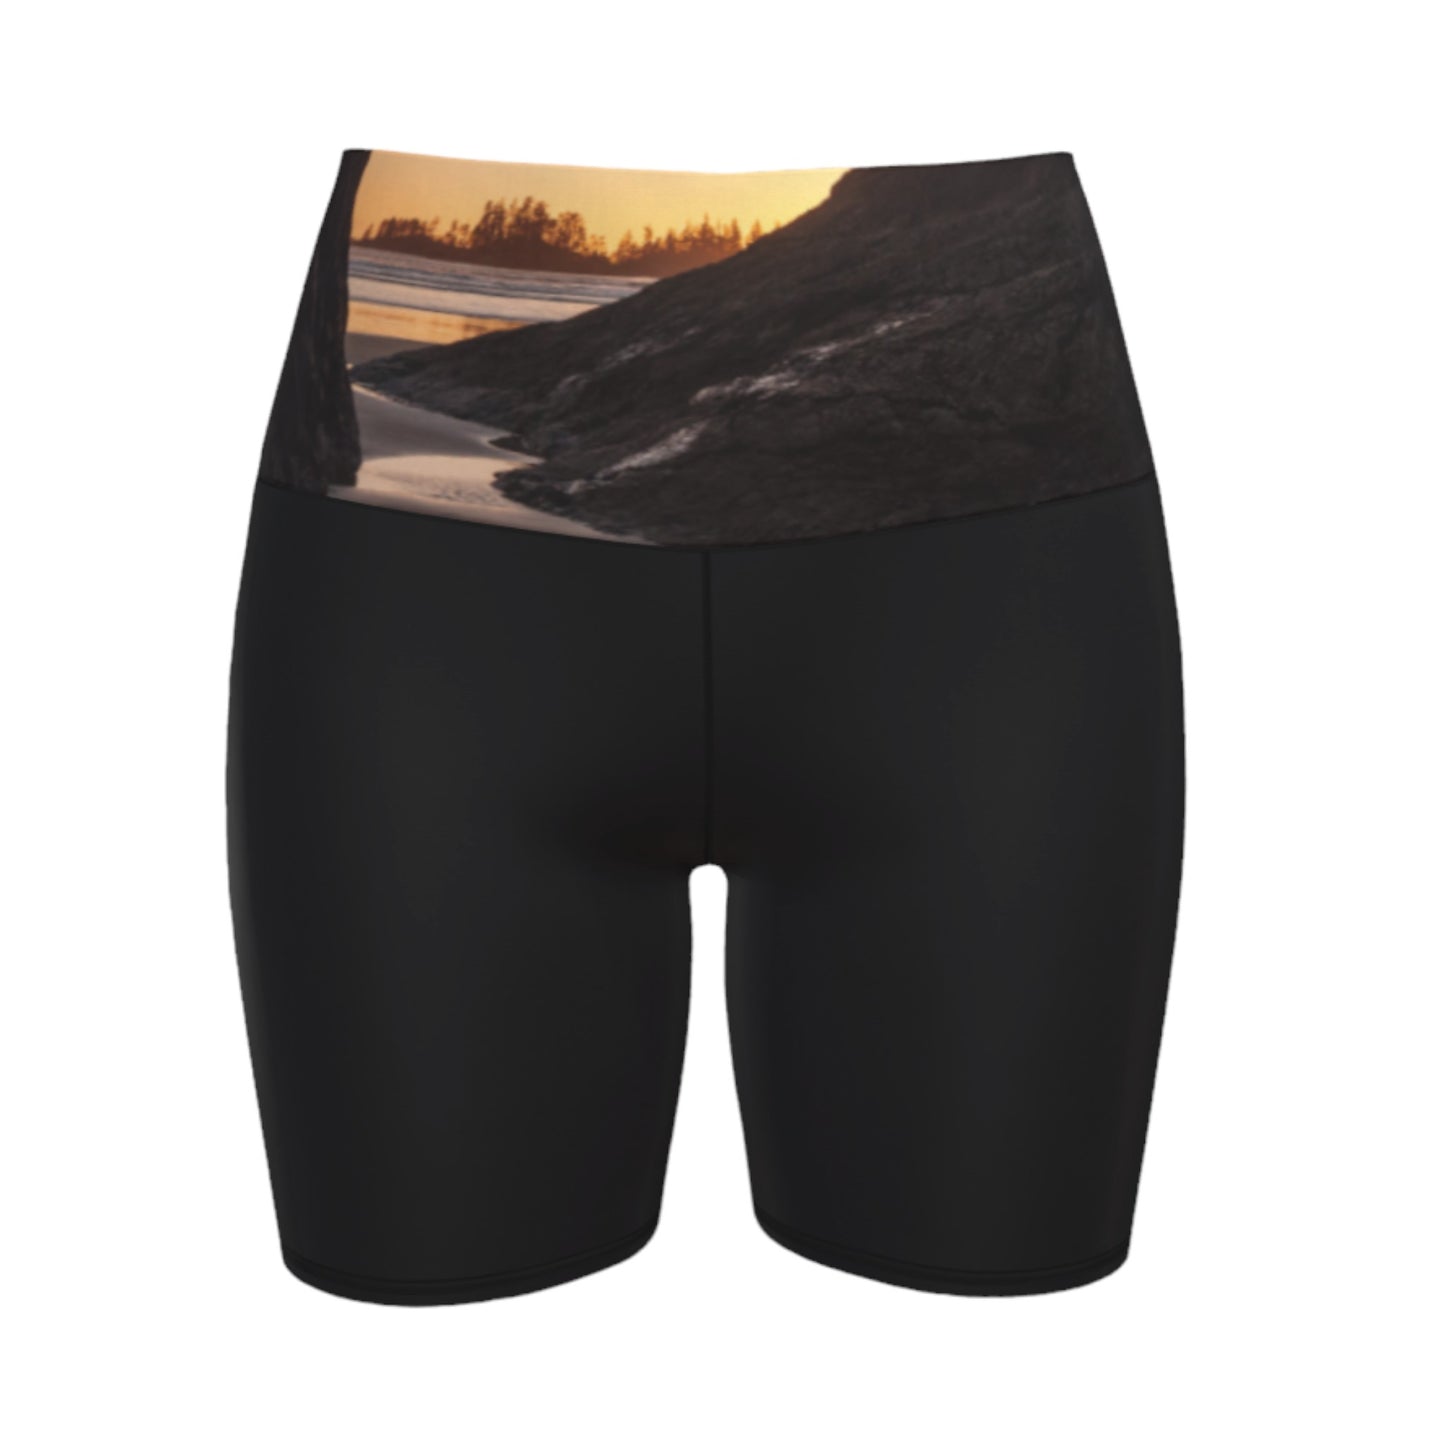 Tofino Sunset Yoga Shorts features an image of a sunset at long beach tofino printed on the waistband. the rest of the shorts are black.